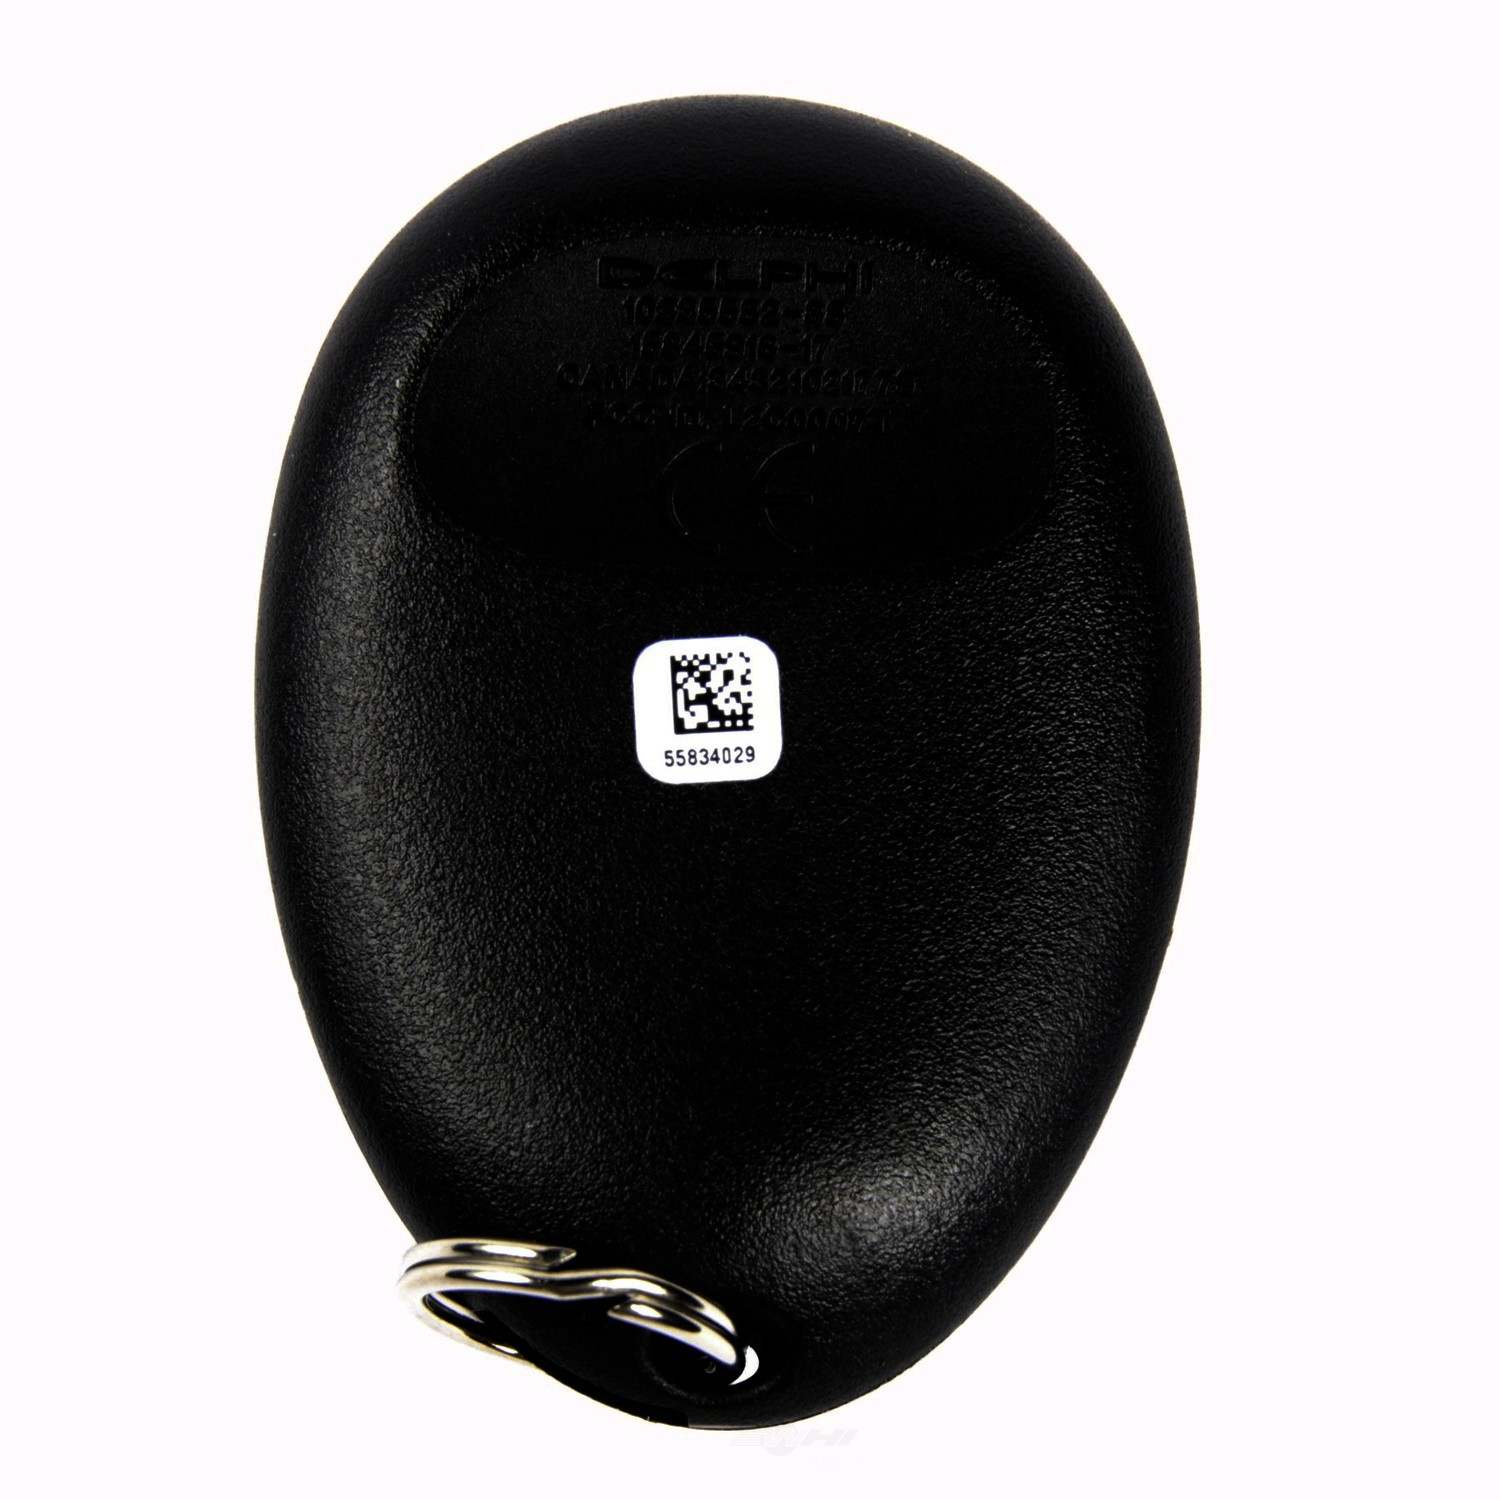 GM GENUINE PARTS - Keyless Entry Transmitter - GMP 10335583